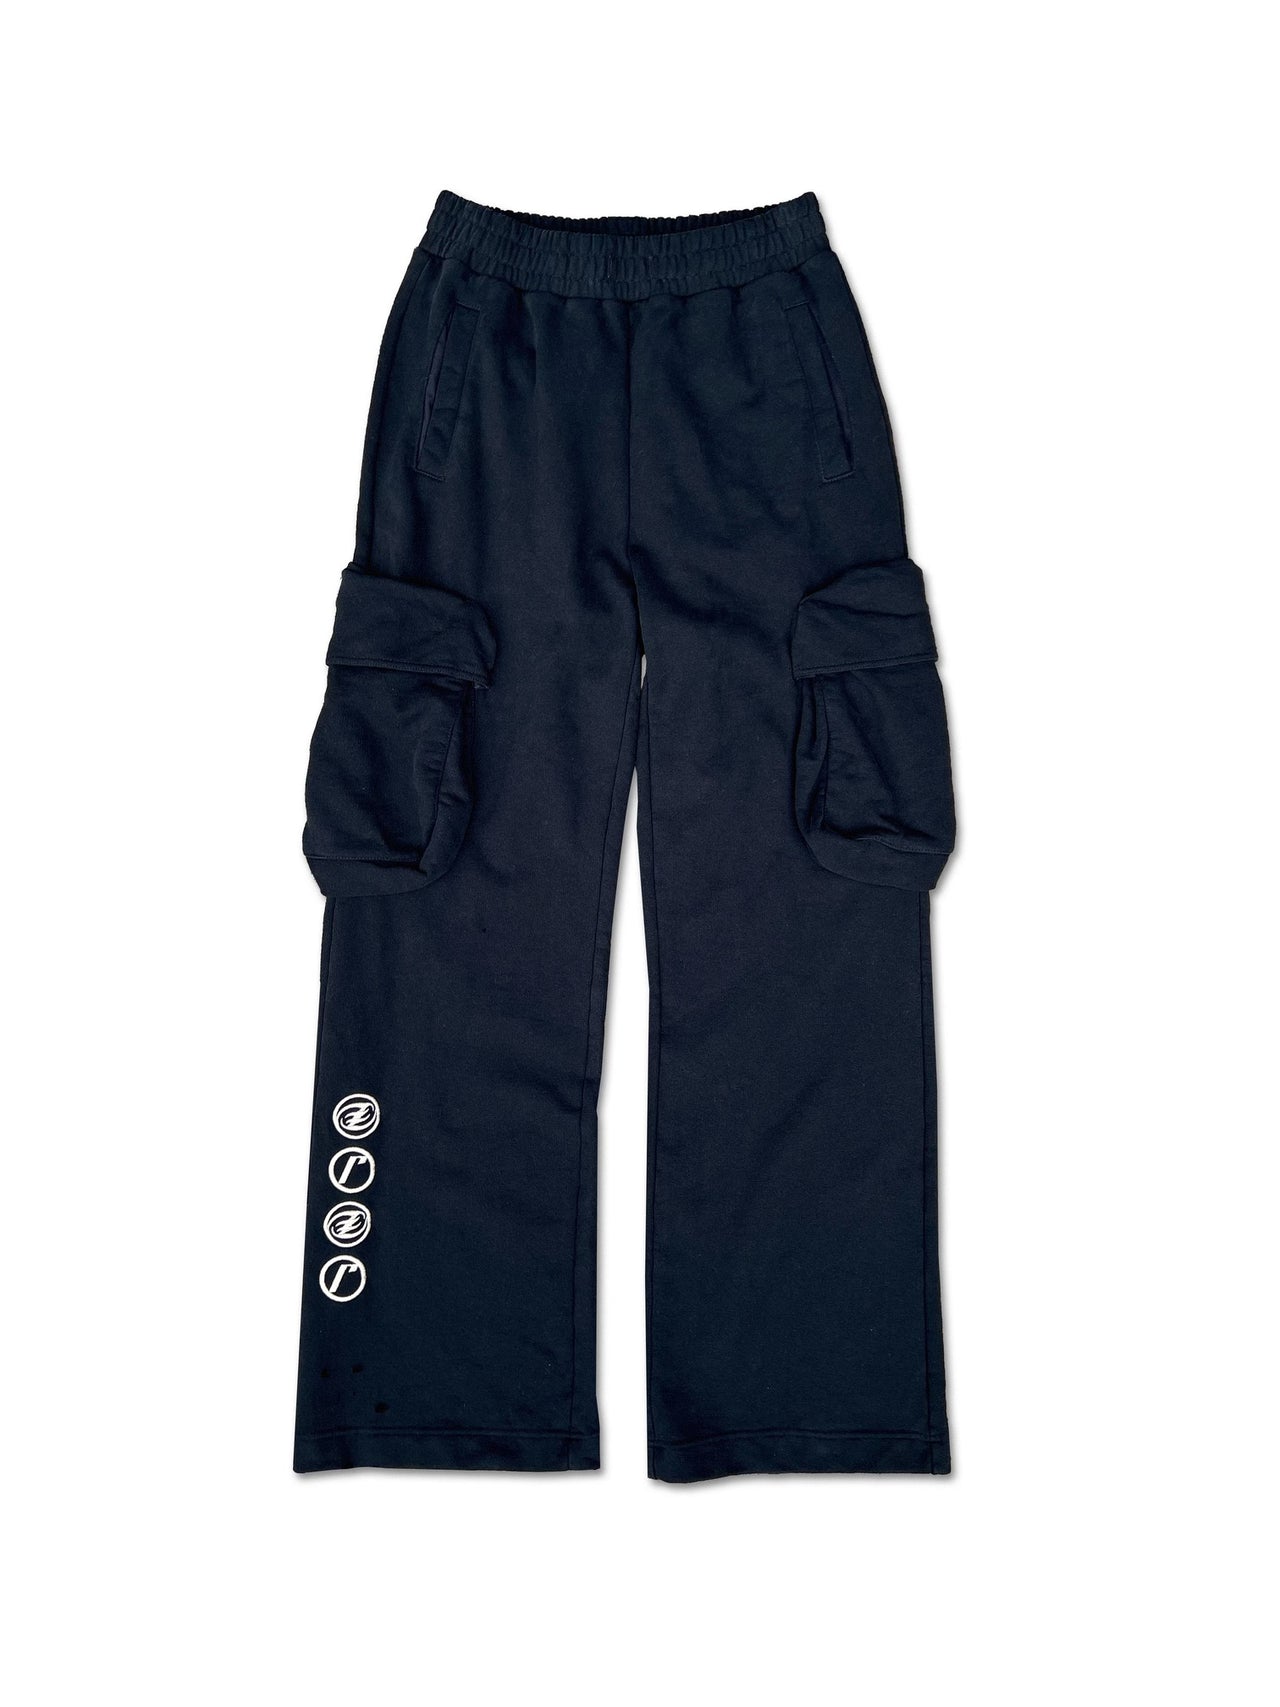 Year of the Dragon Cargo Pants in Vintage Black